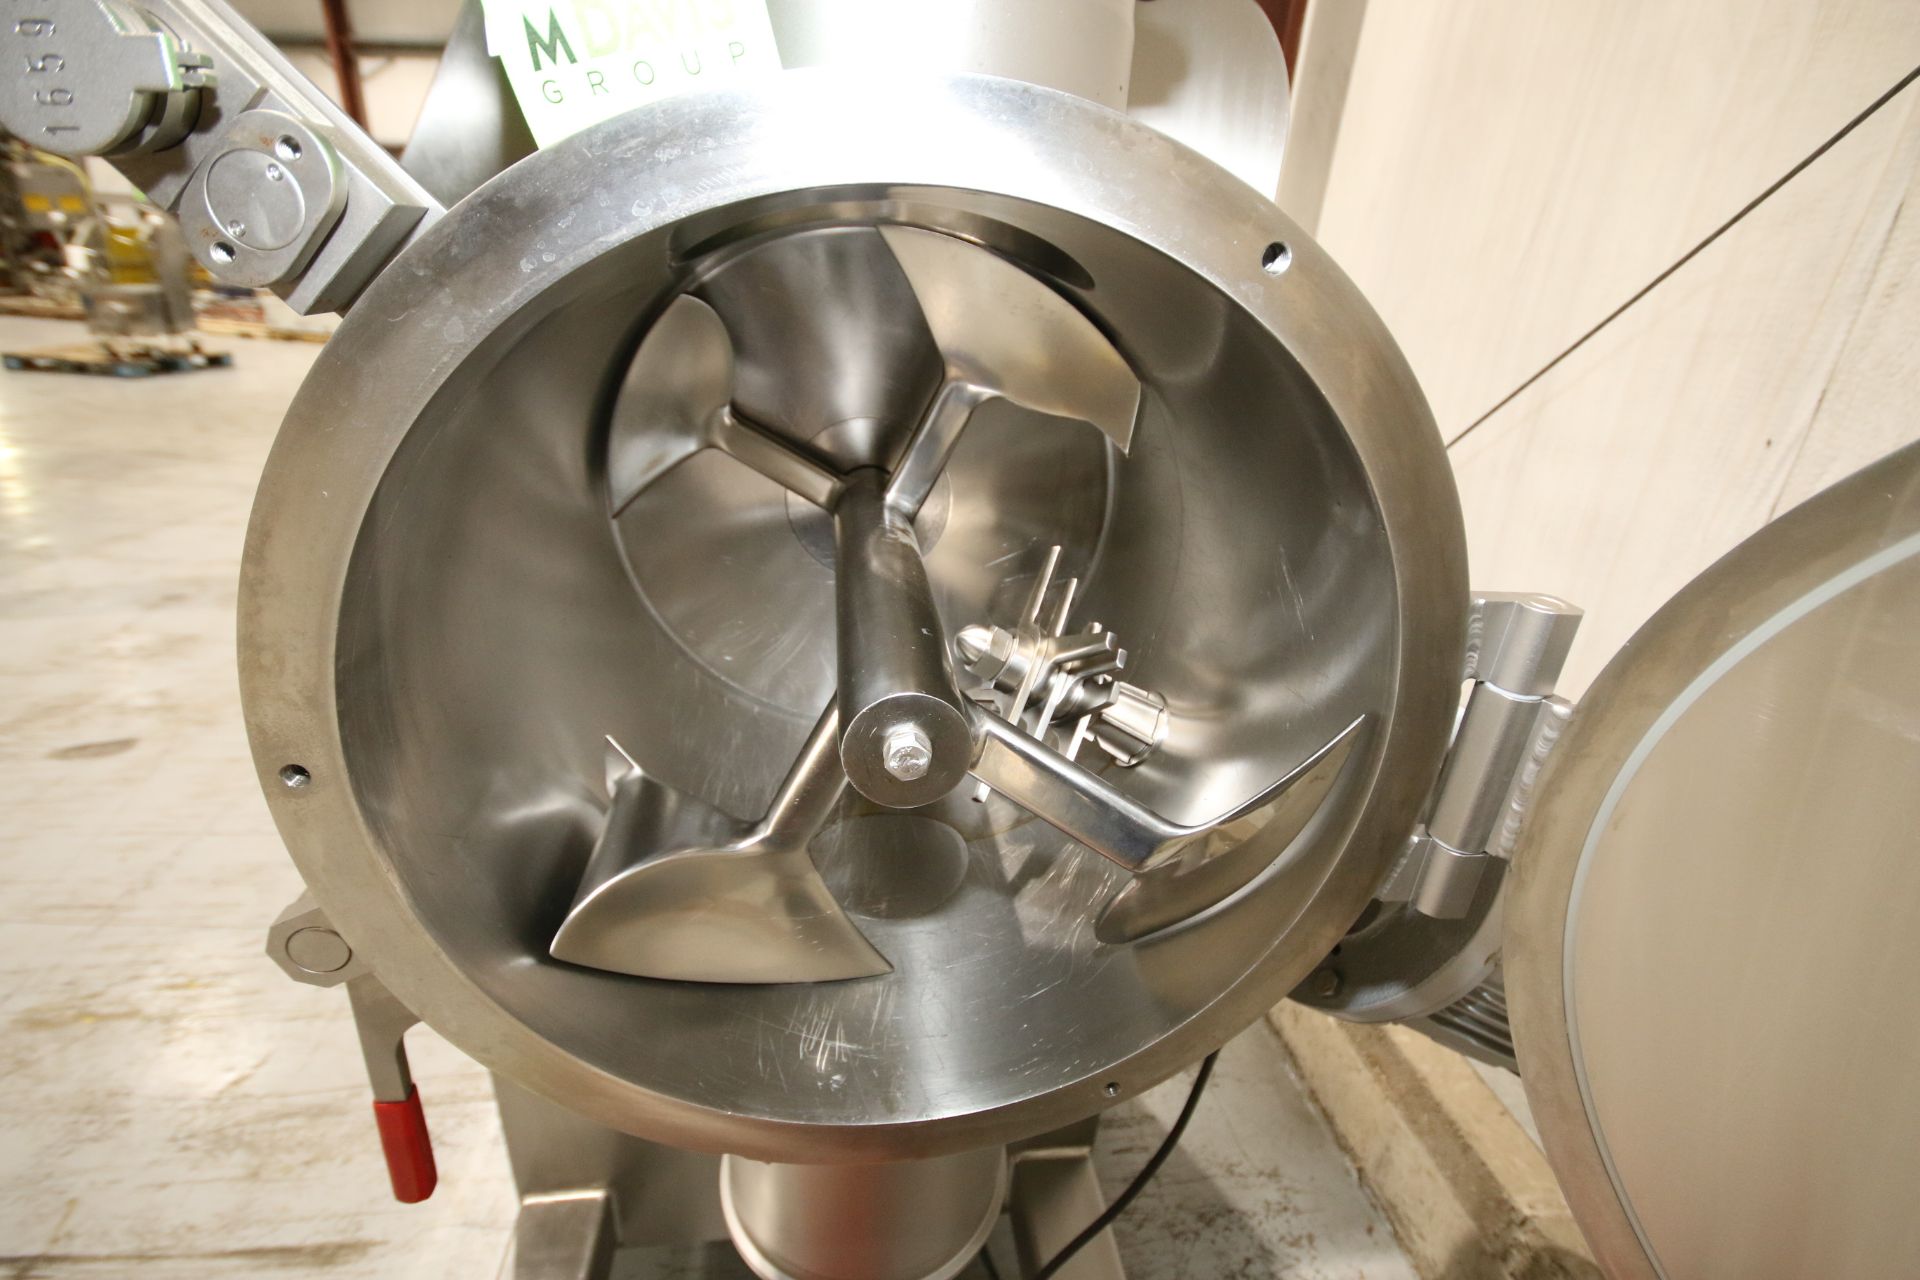 2011 Lodige Process Technology 50 Litre Batch Mixer, Type L50, S/N 16592, Equipped with 4-Paddle - Image 4 of 13